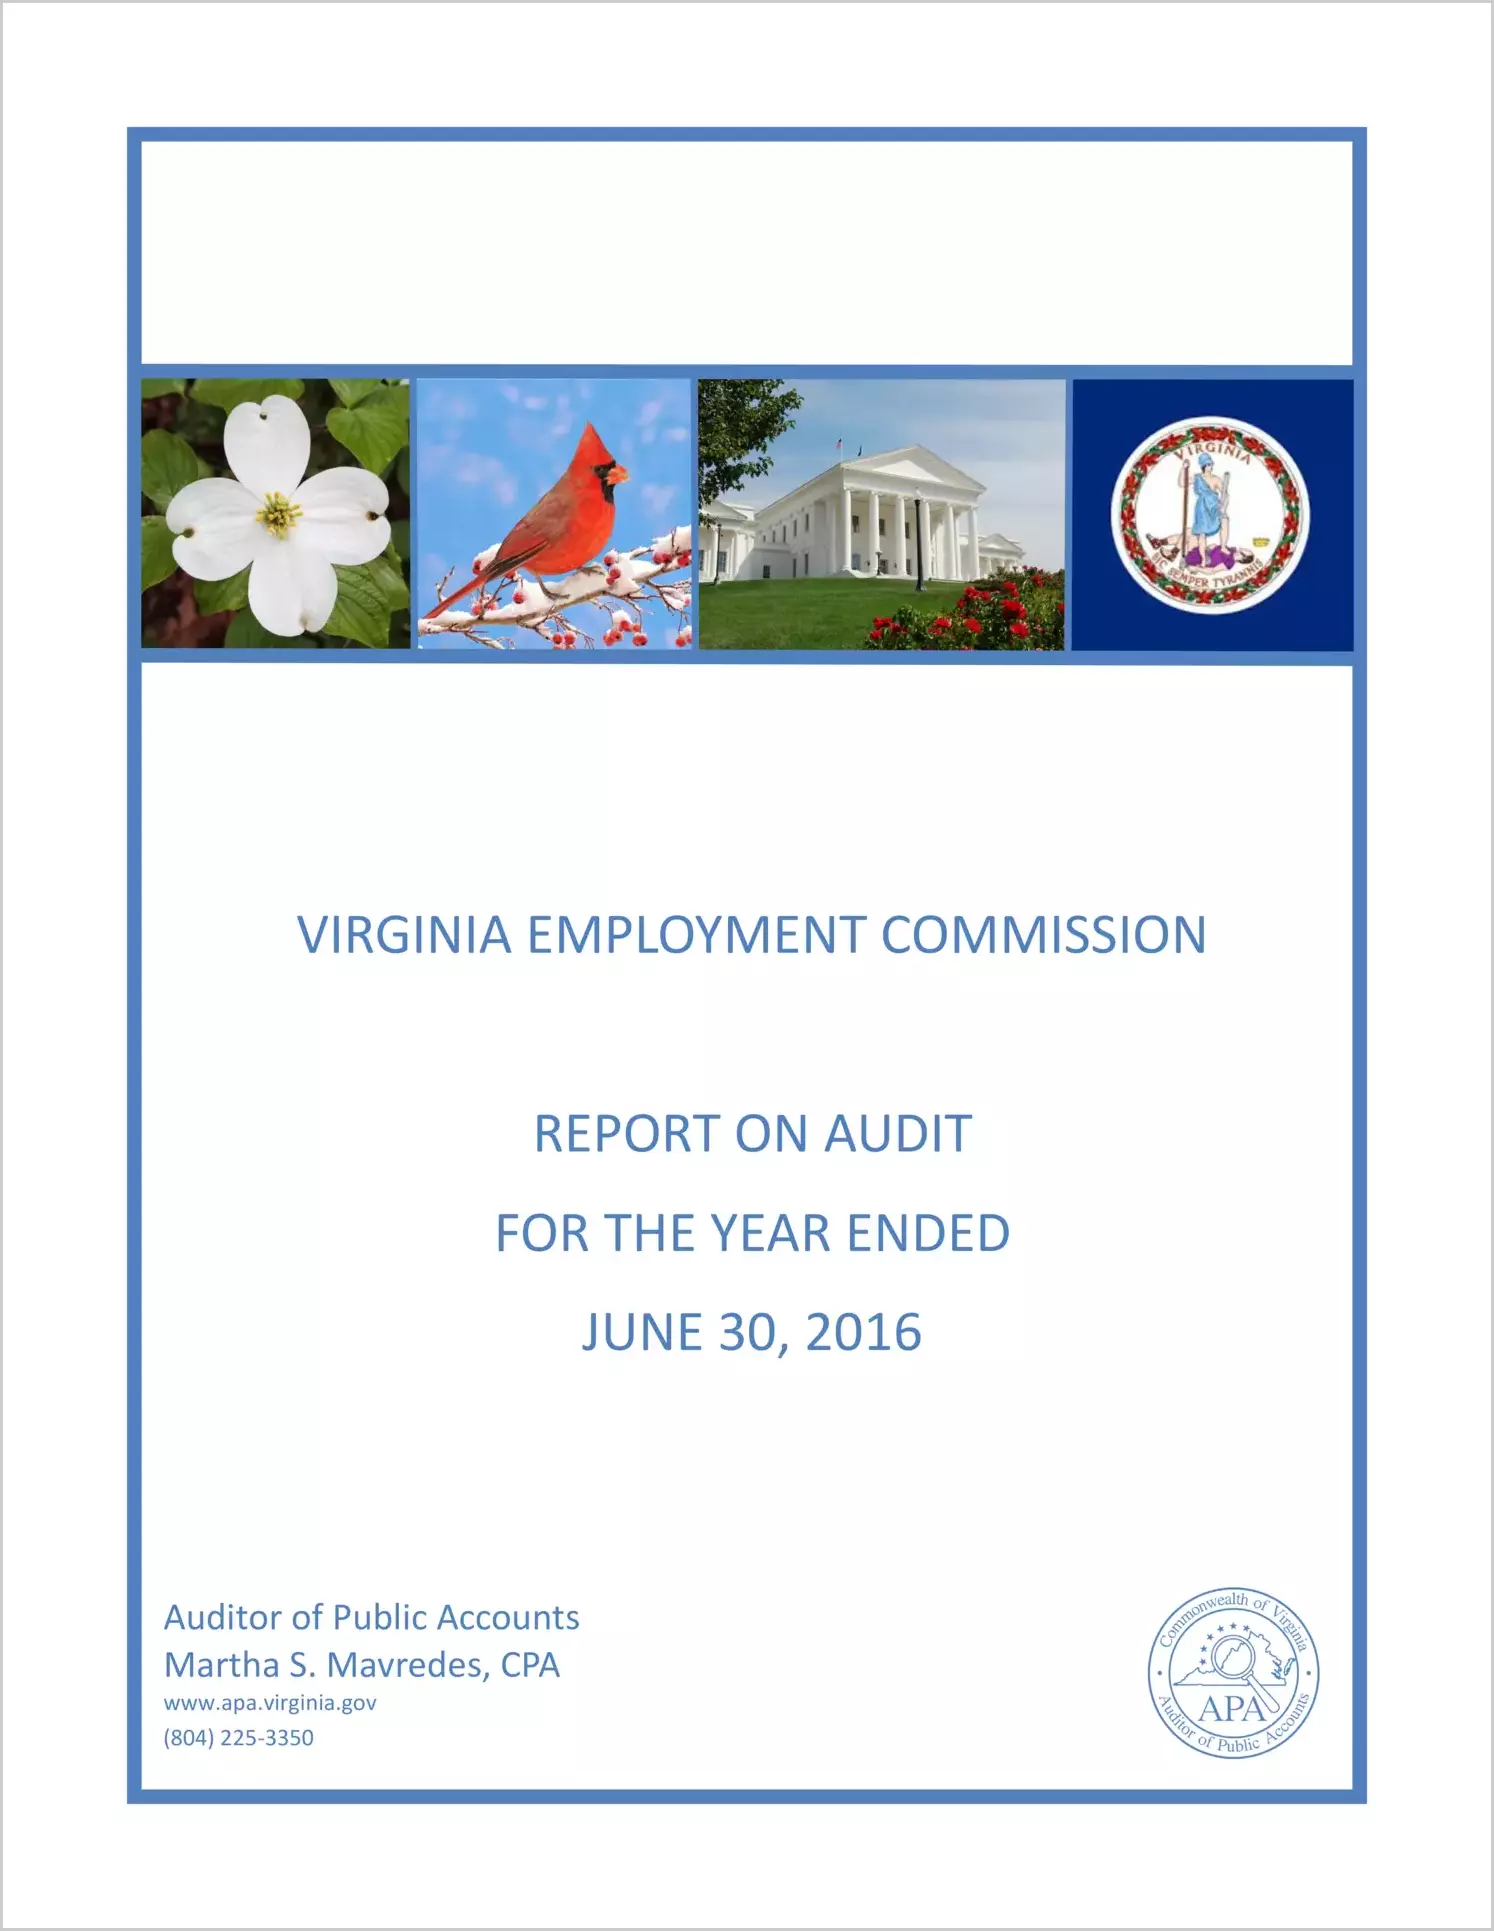 Virginia Employment Commission for the year ended June 30, 2016